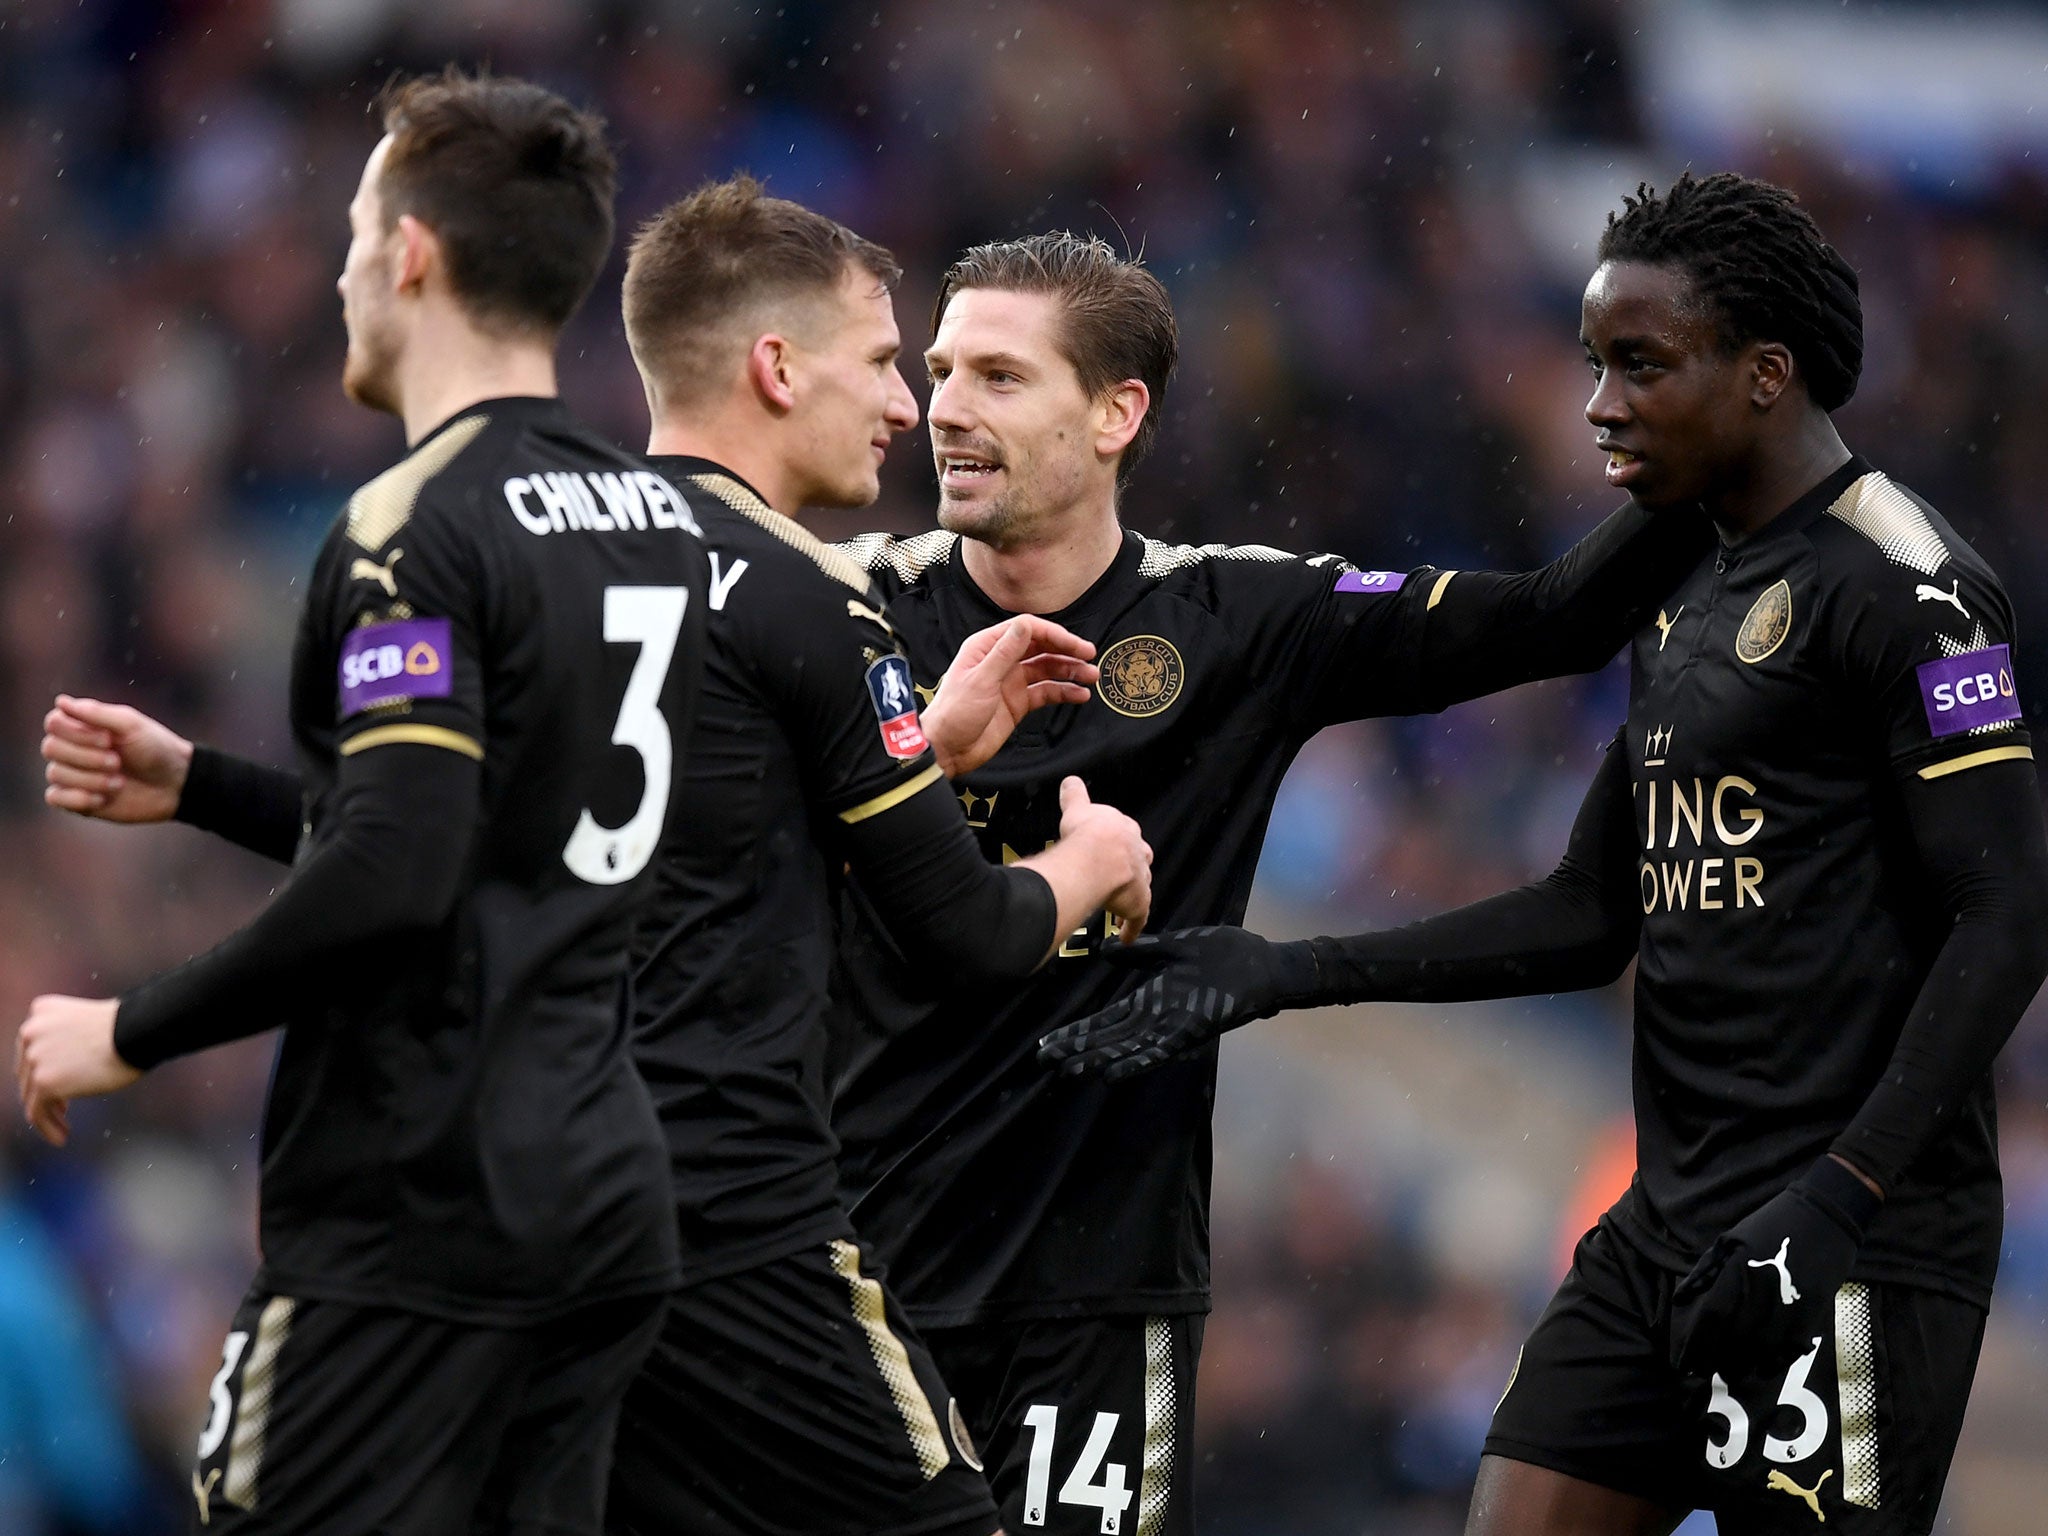 Leicester are looking to make genuine progress following their title-winning season